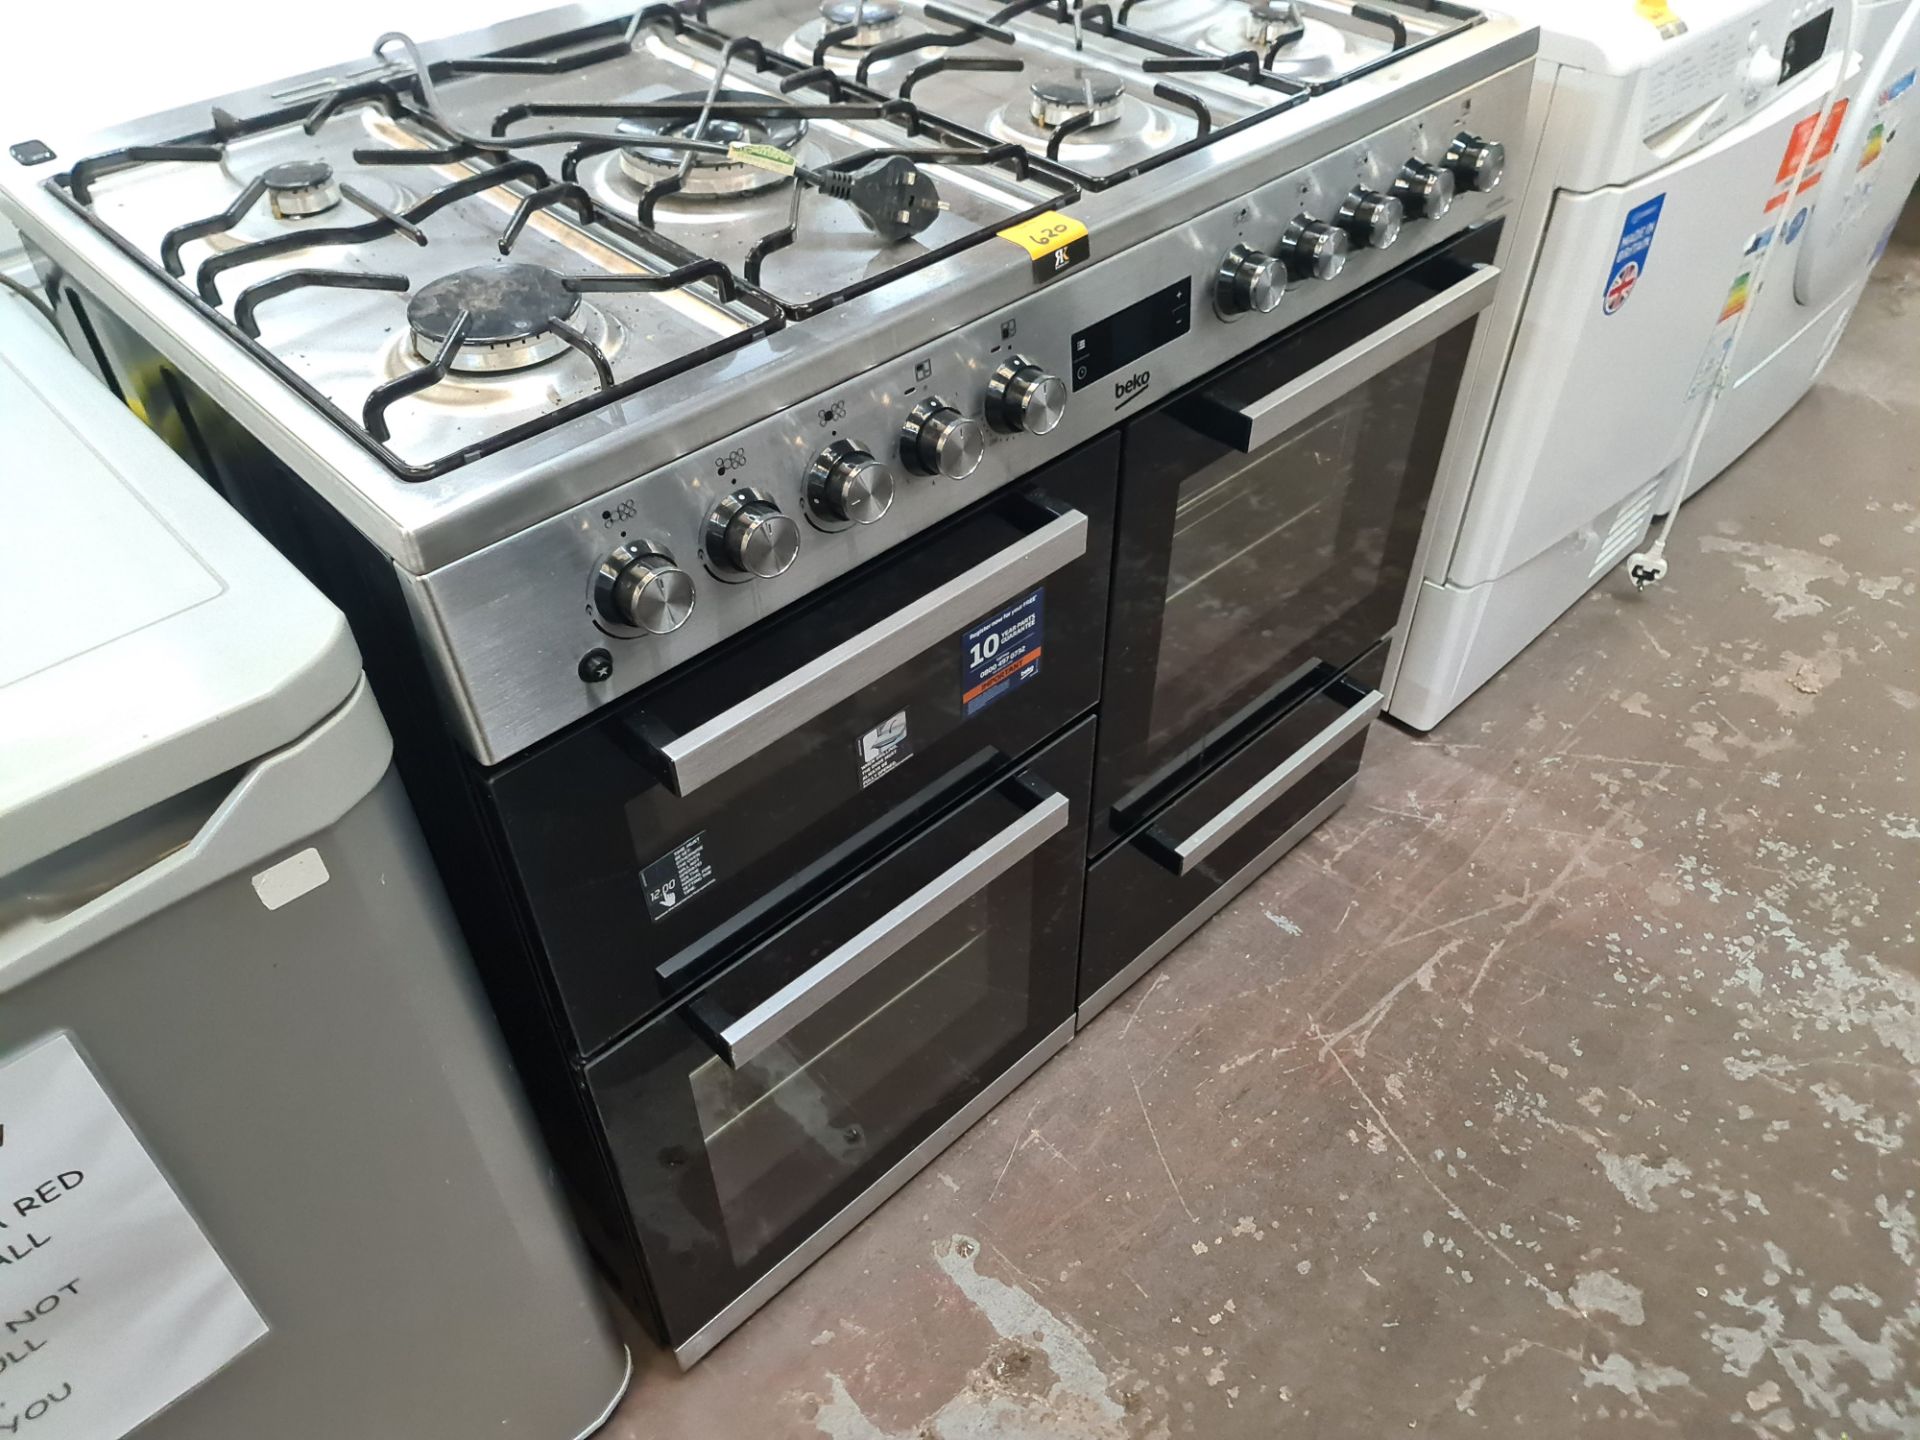 Beko large range oven with a total of 7 hobs - Image 4 of 10